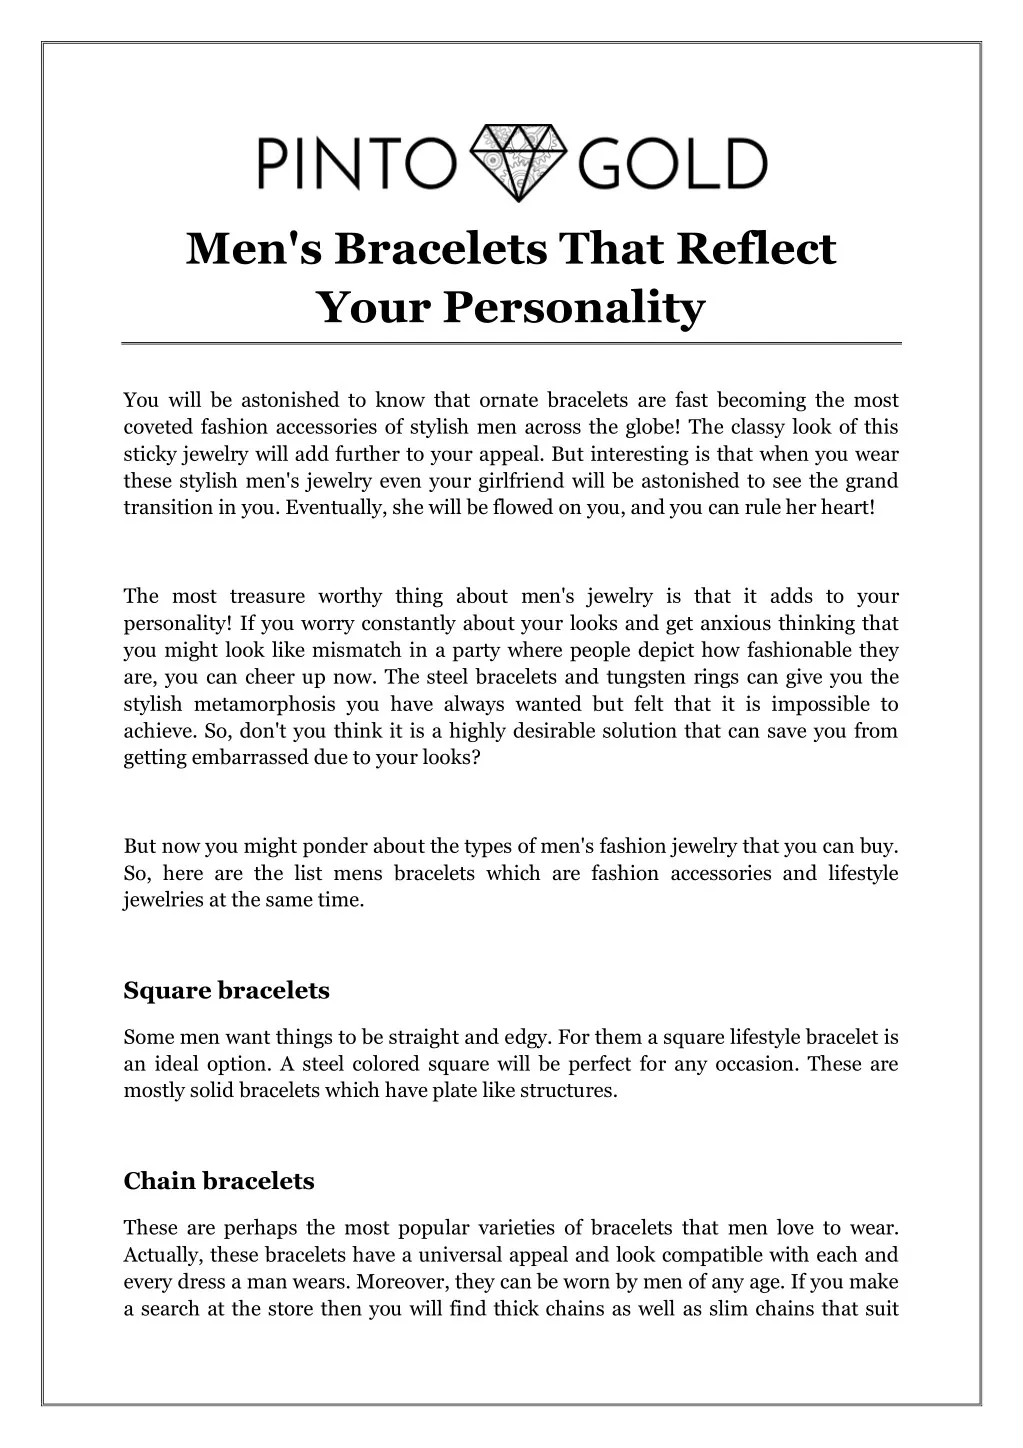 men s bracelets that reflect your personality